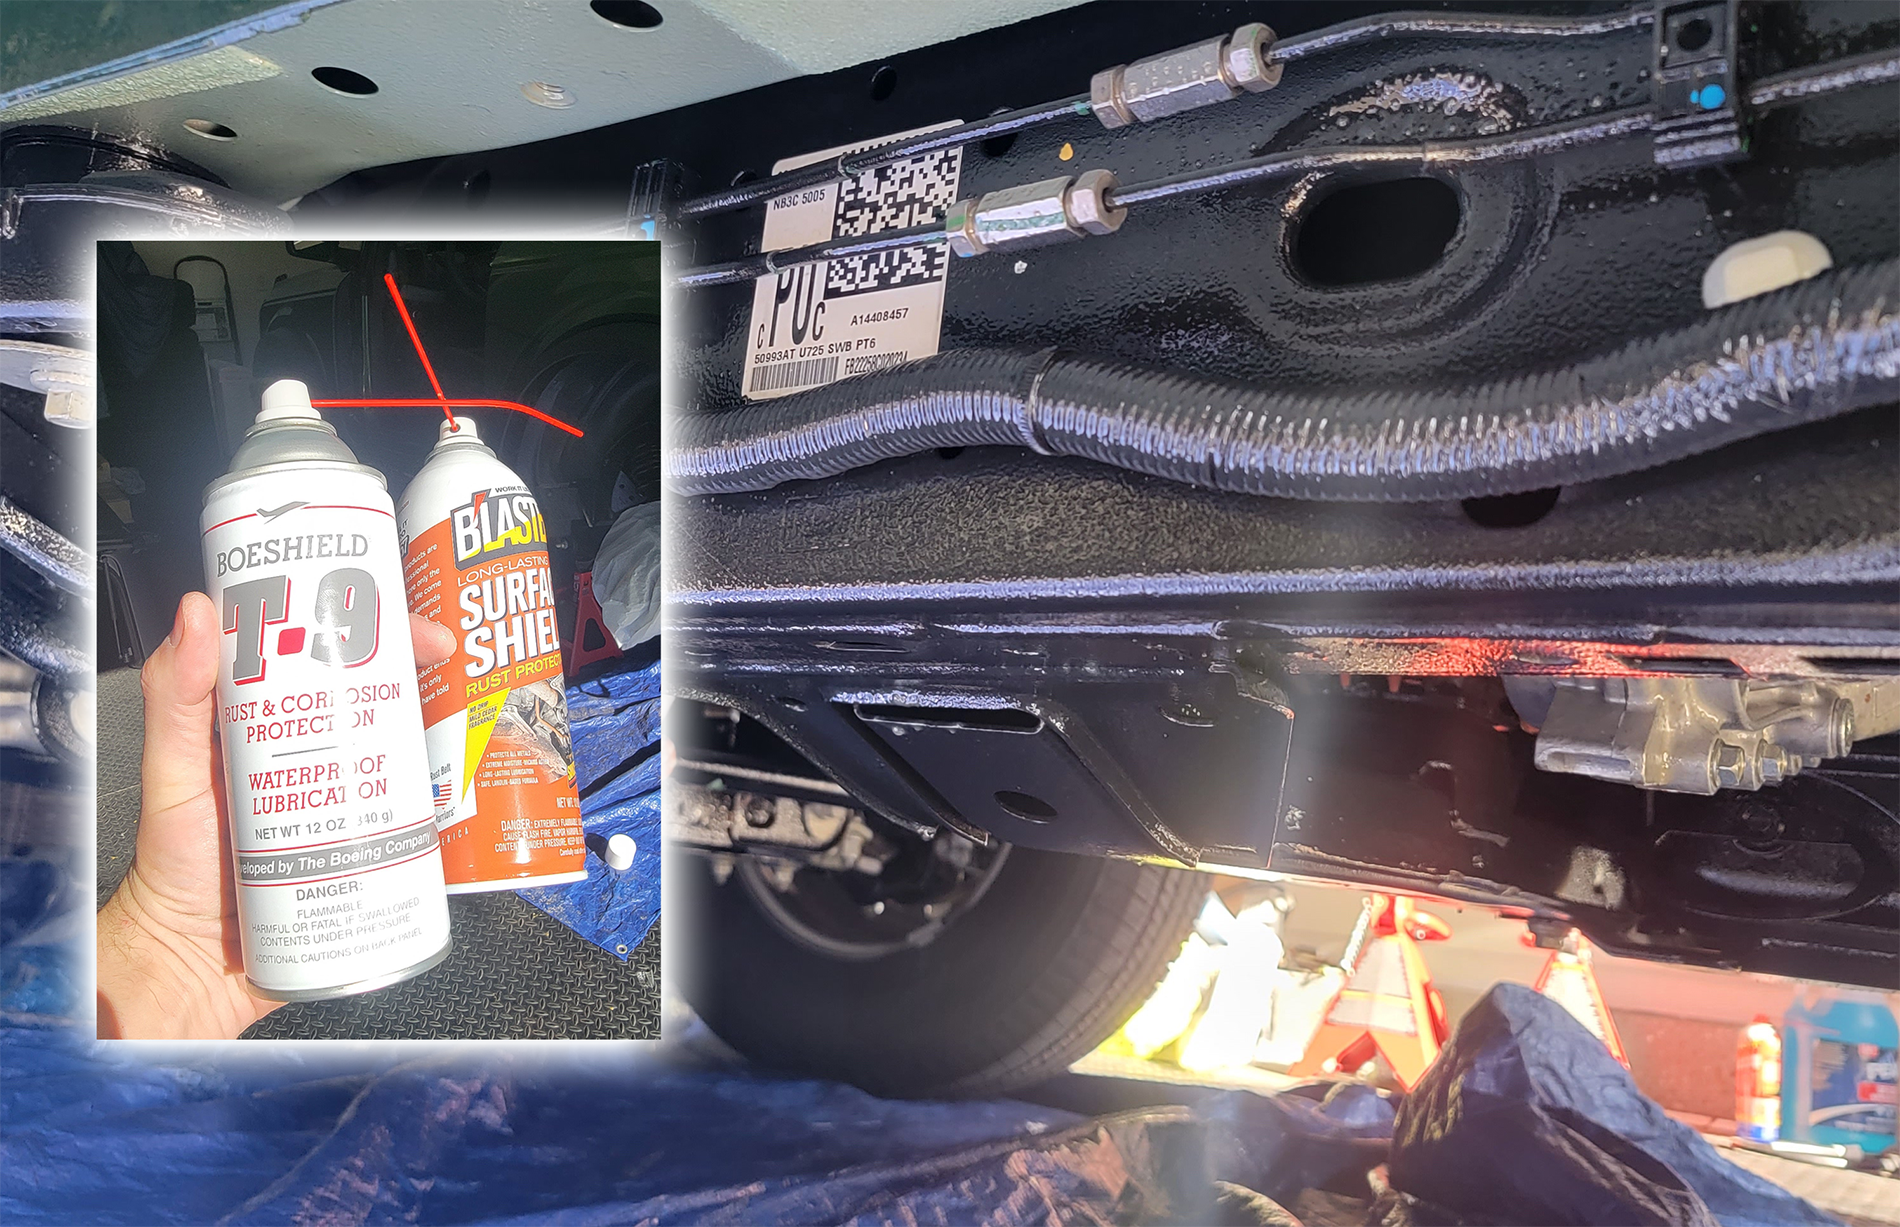 Rust proofing using NEW PB Blaster Surface Shield & T9 -- DIY & Result  Photos  Bronco6G - 2021+ Ford Bronco & Bronco Raptor Forum, News, Blog &  Owners Community